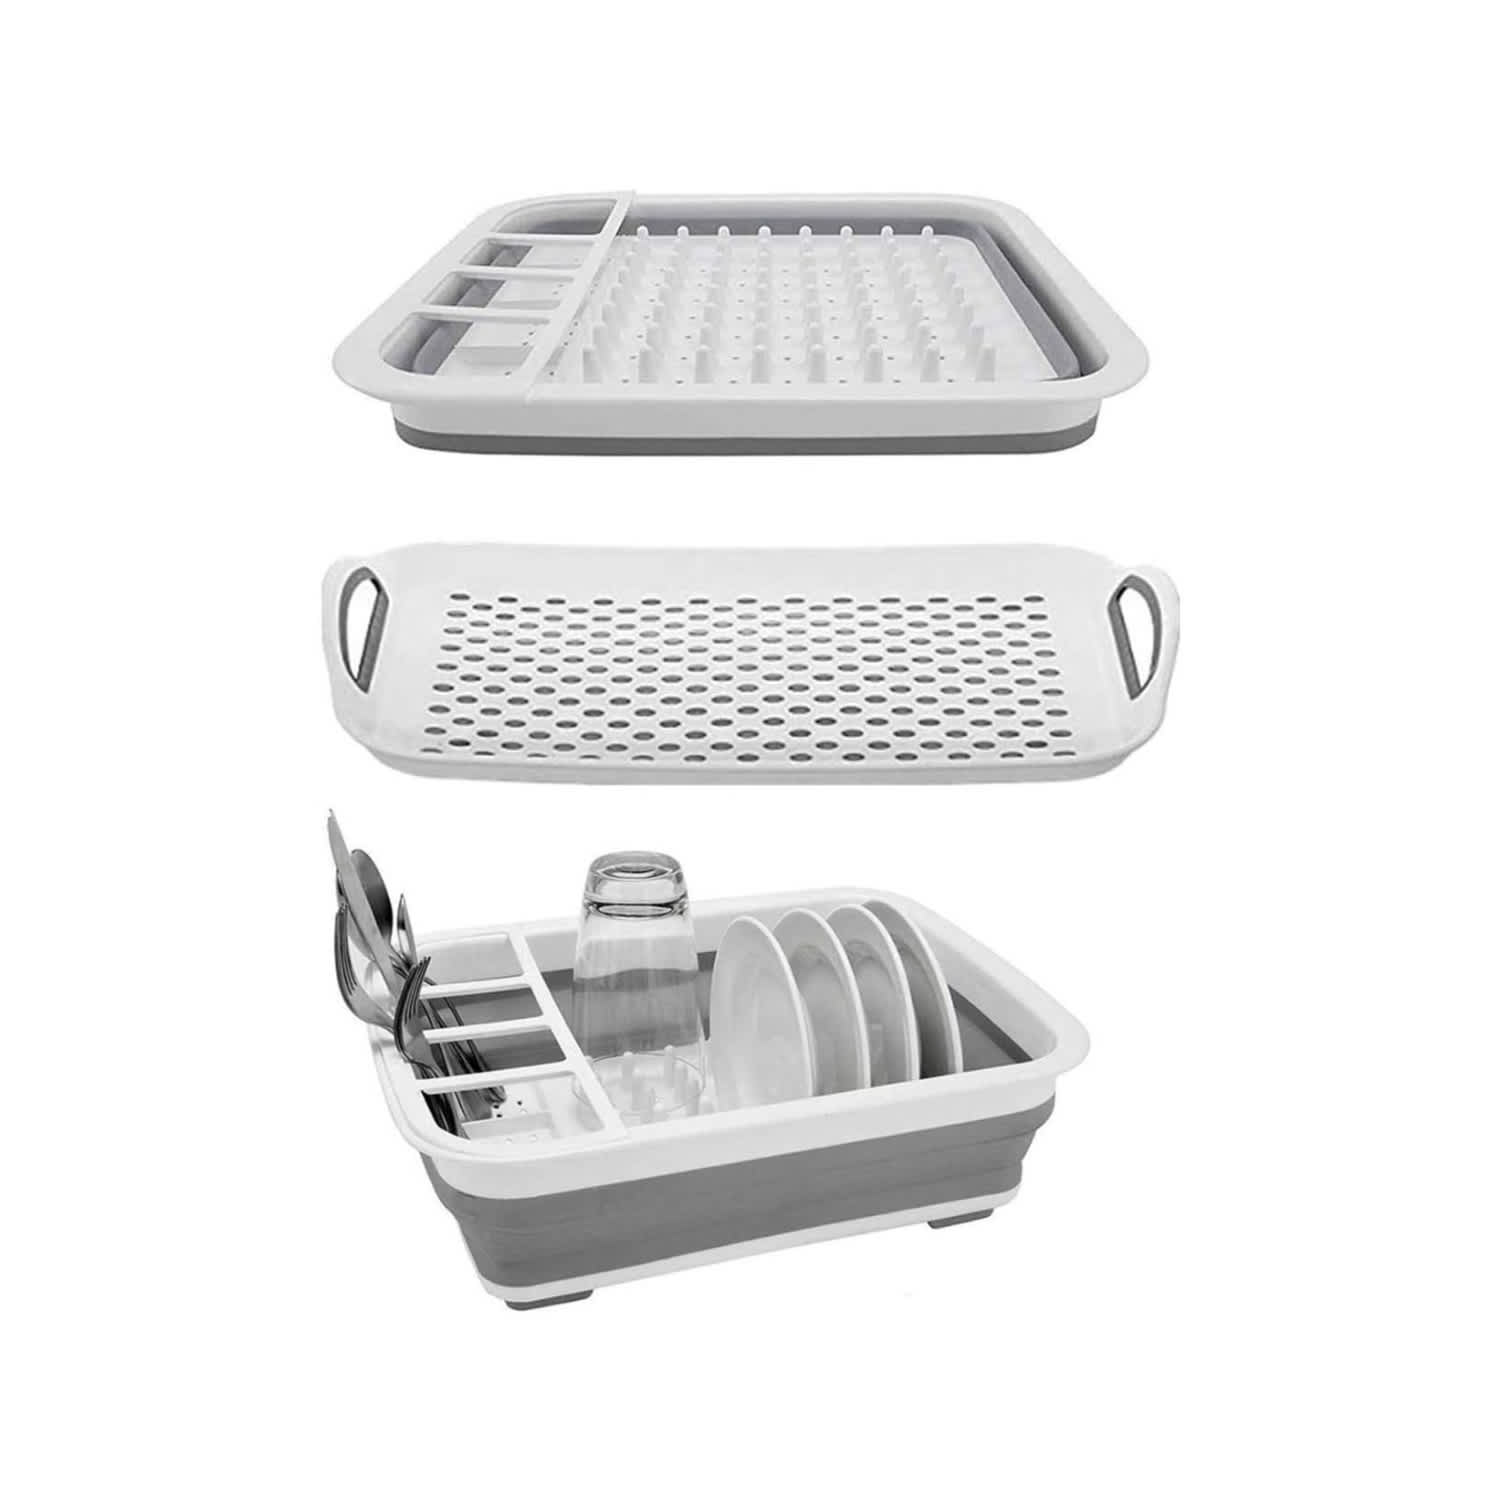 AIDERLY Iron Dish Drying Rack with Drainboard Dish Nepal